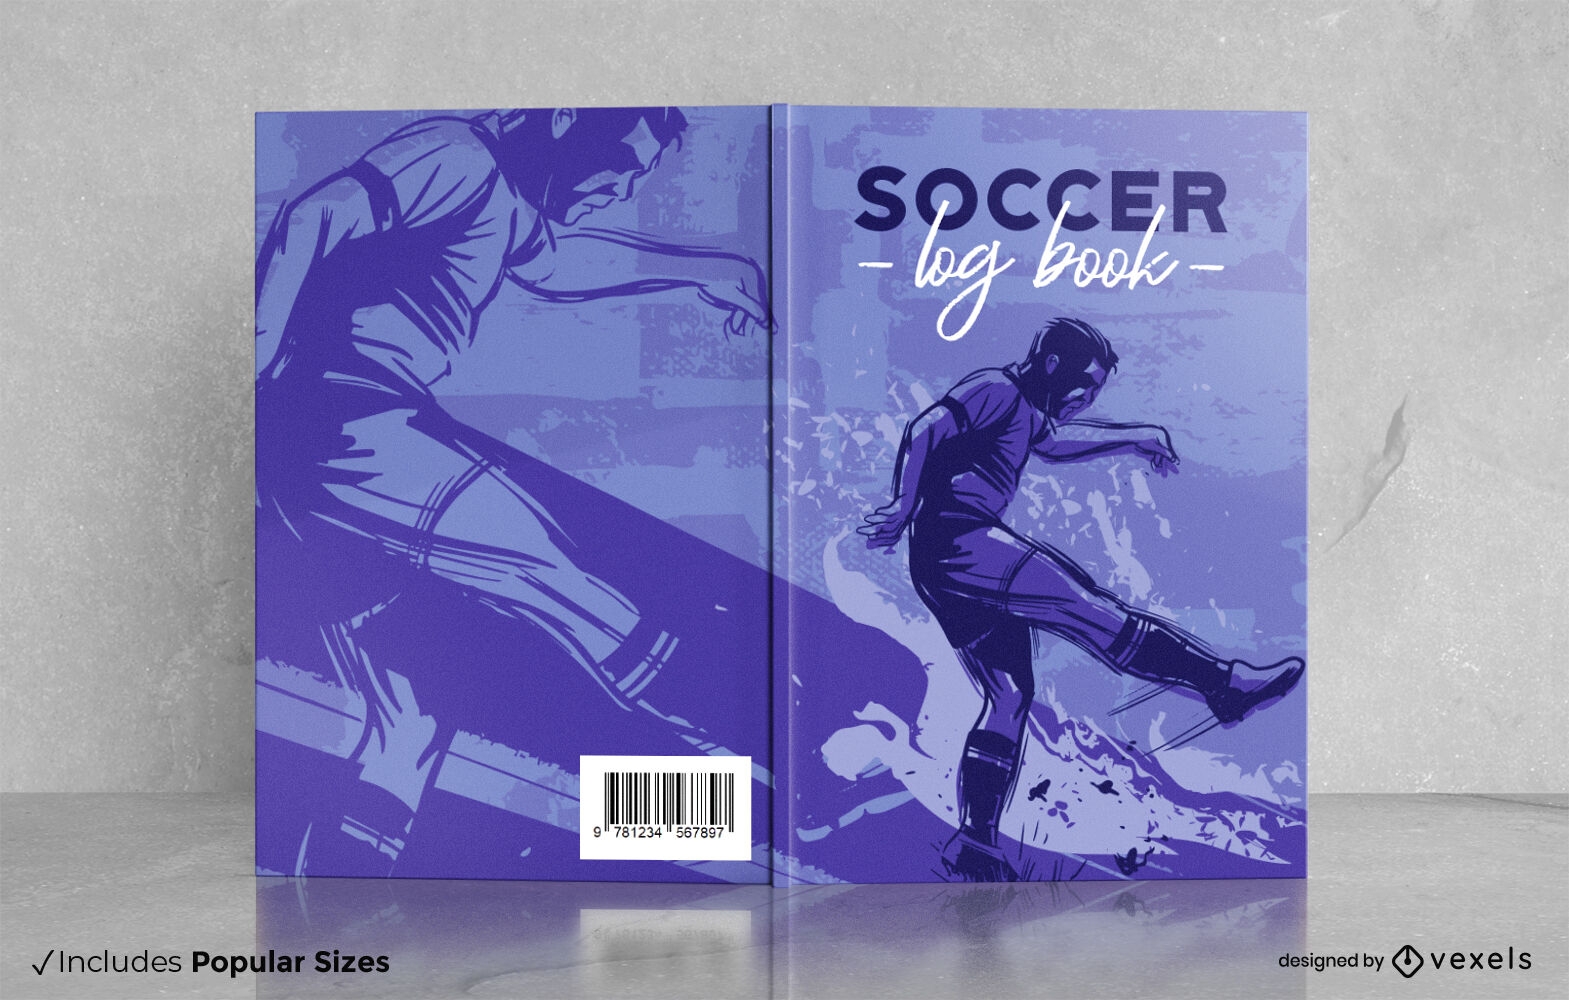 Man playing soccer book cover design